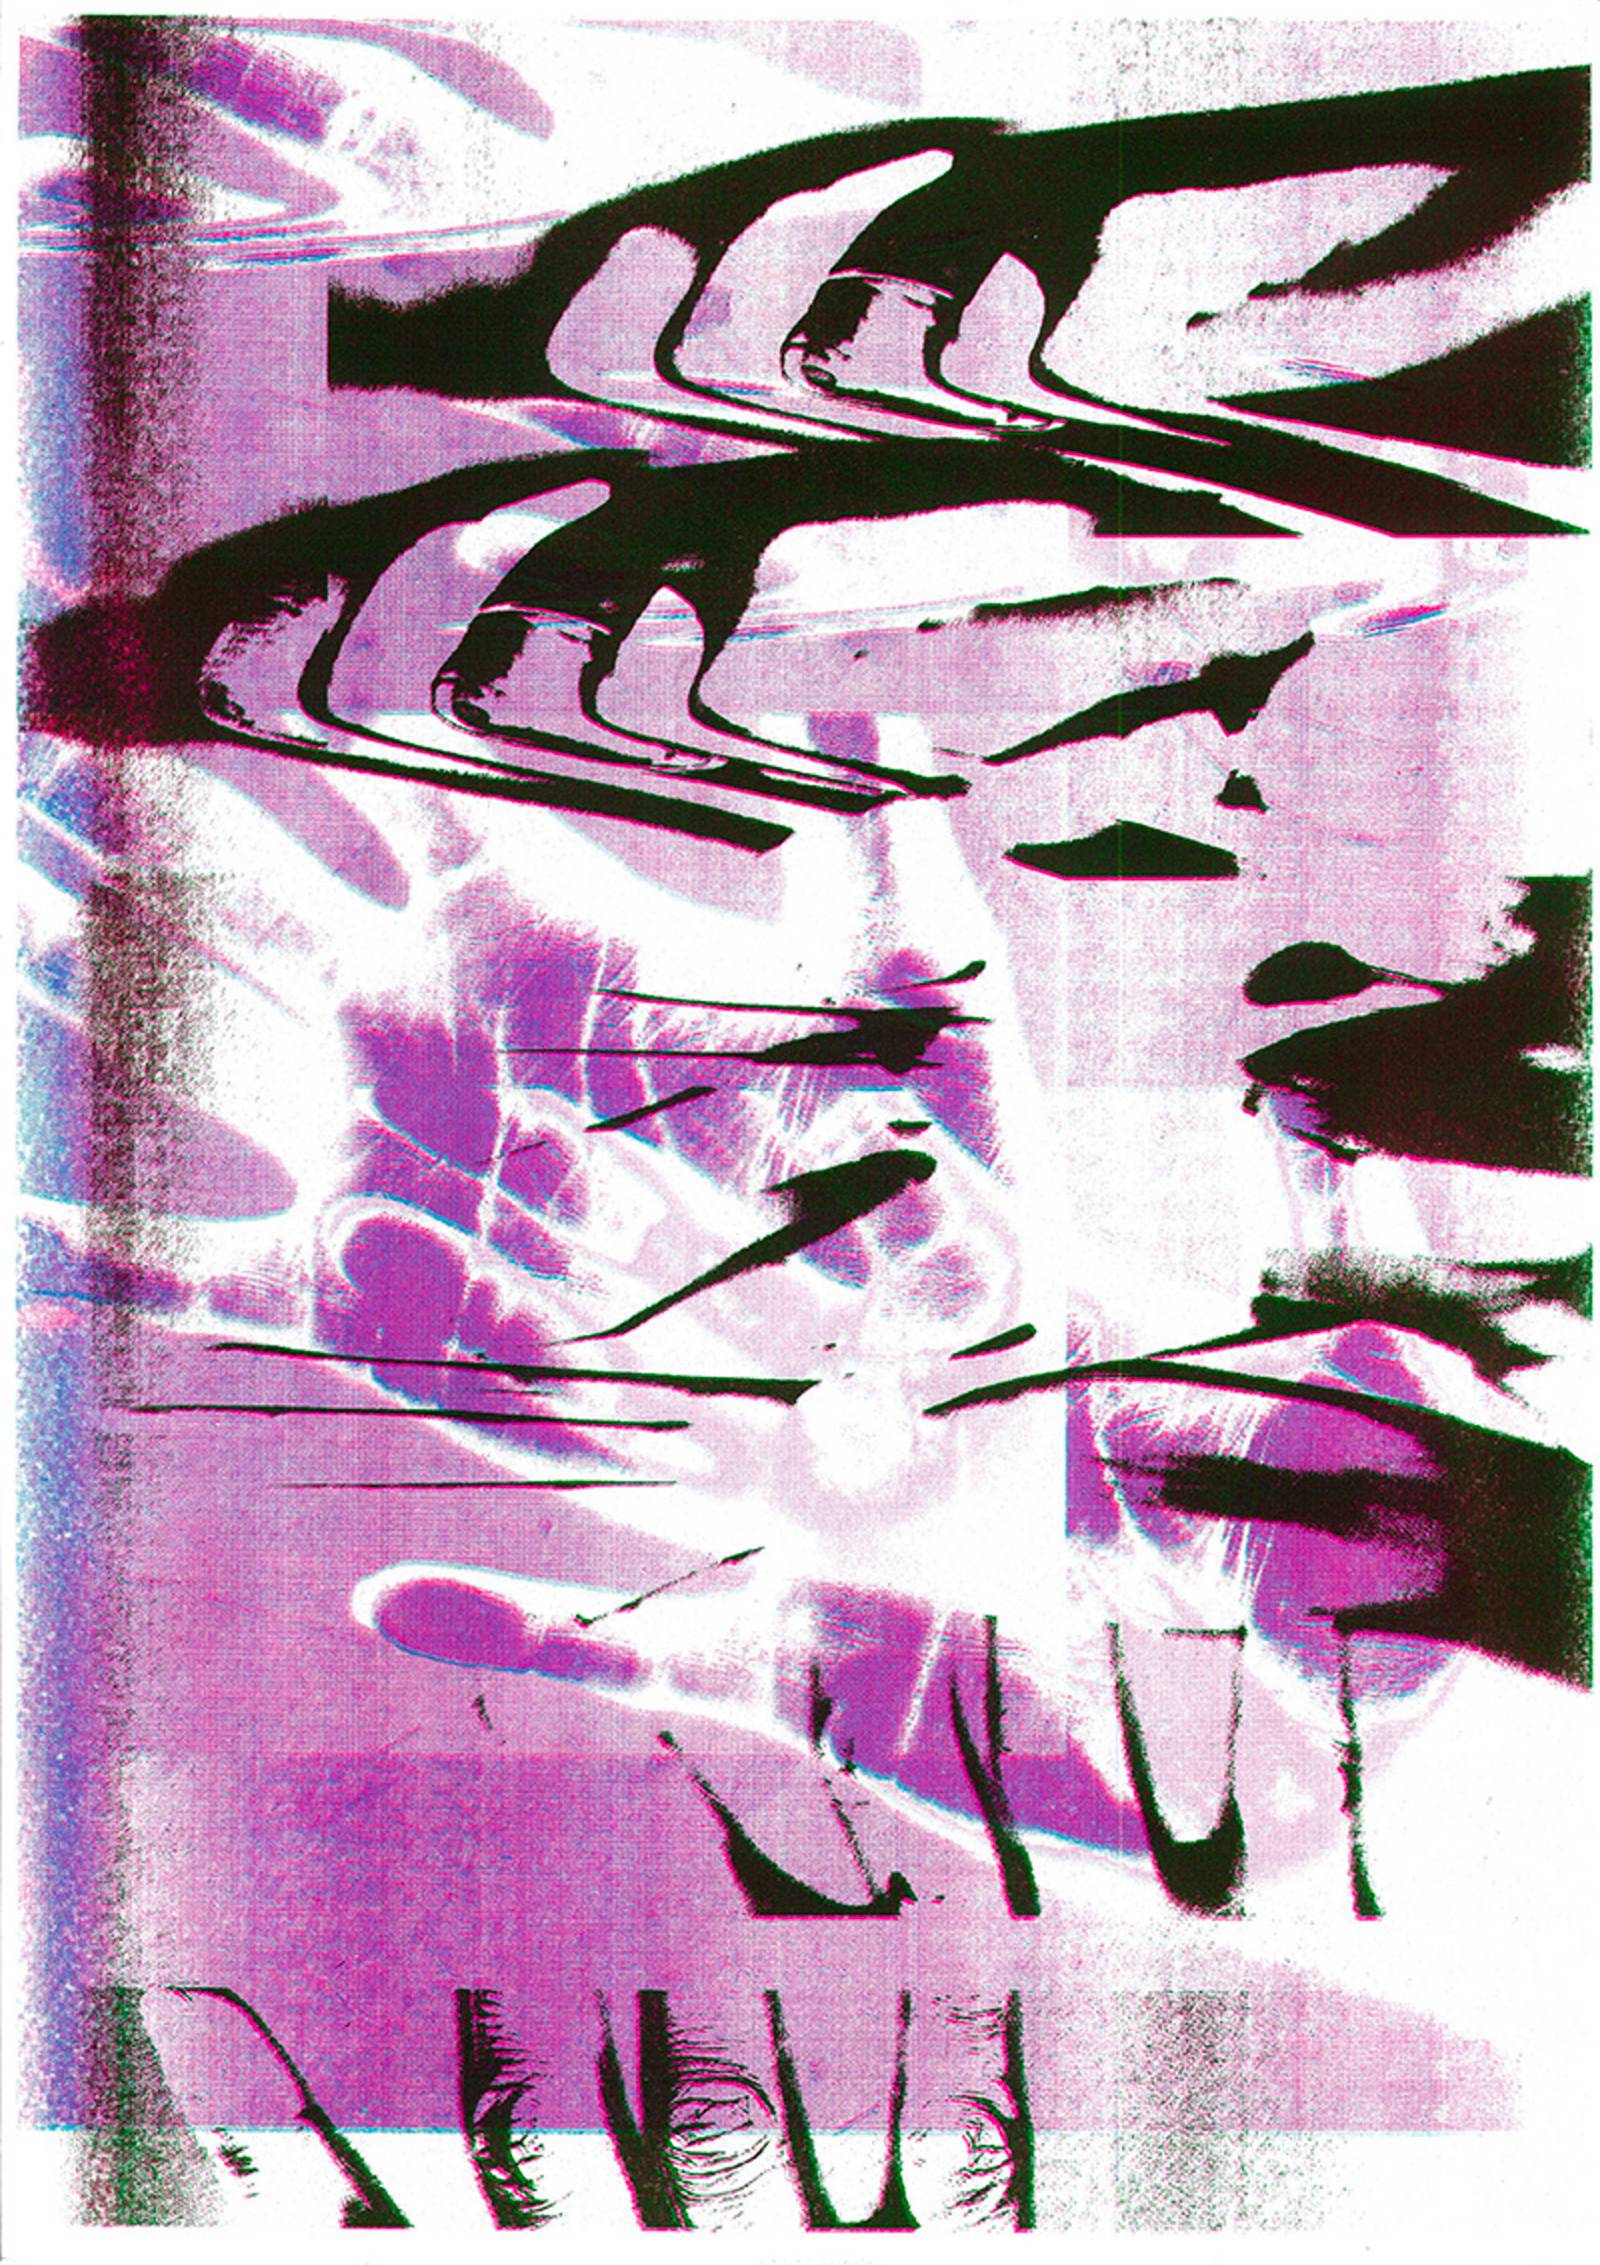 Glitching hands in green, black and white upon a purple background